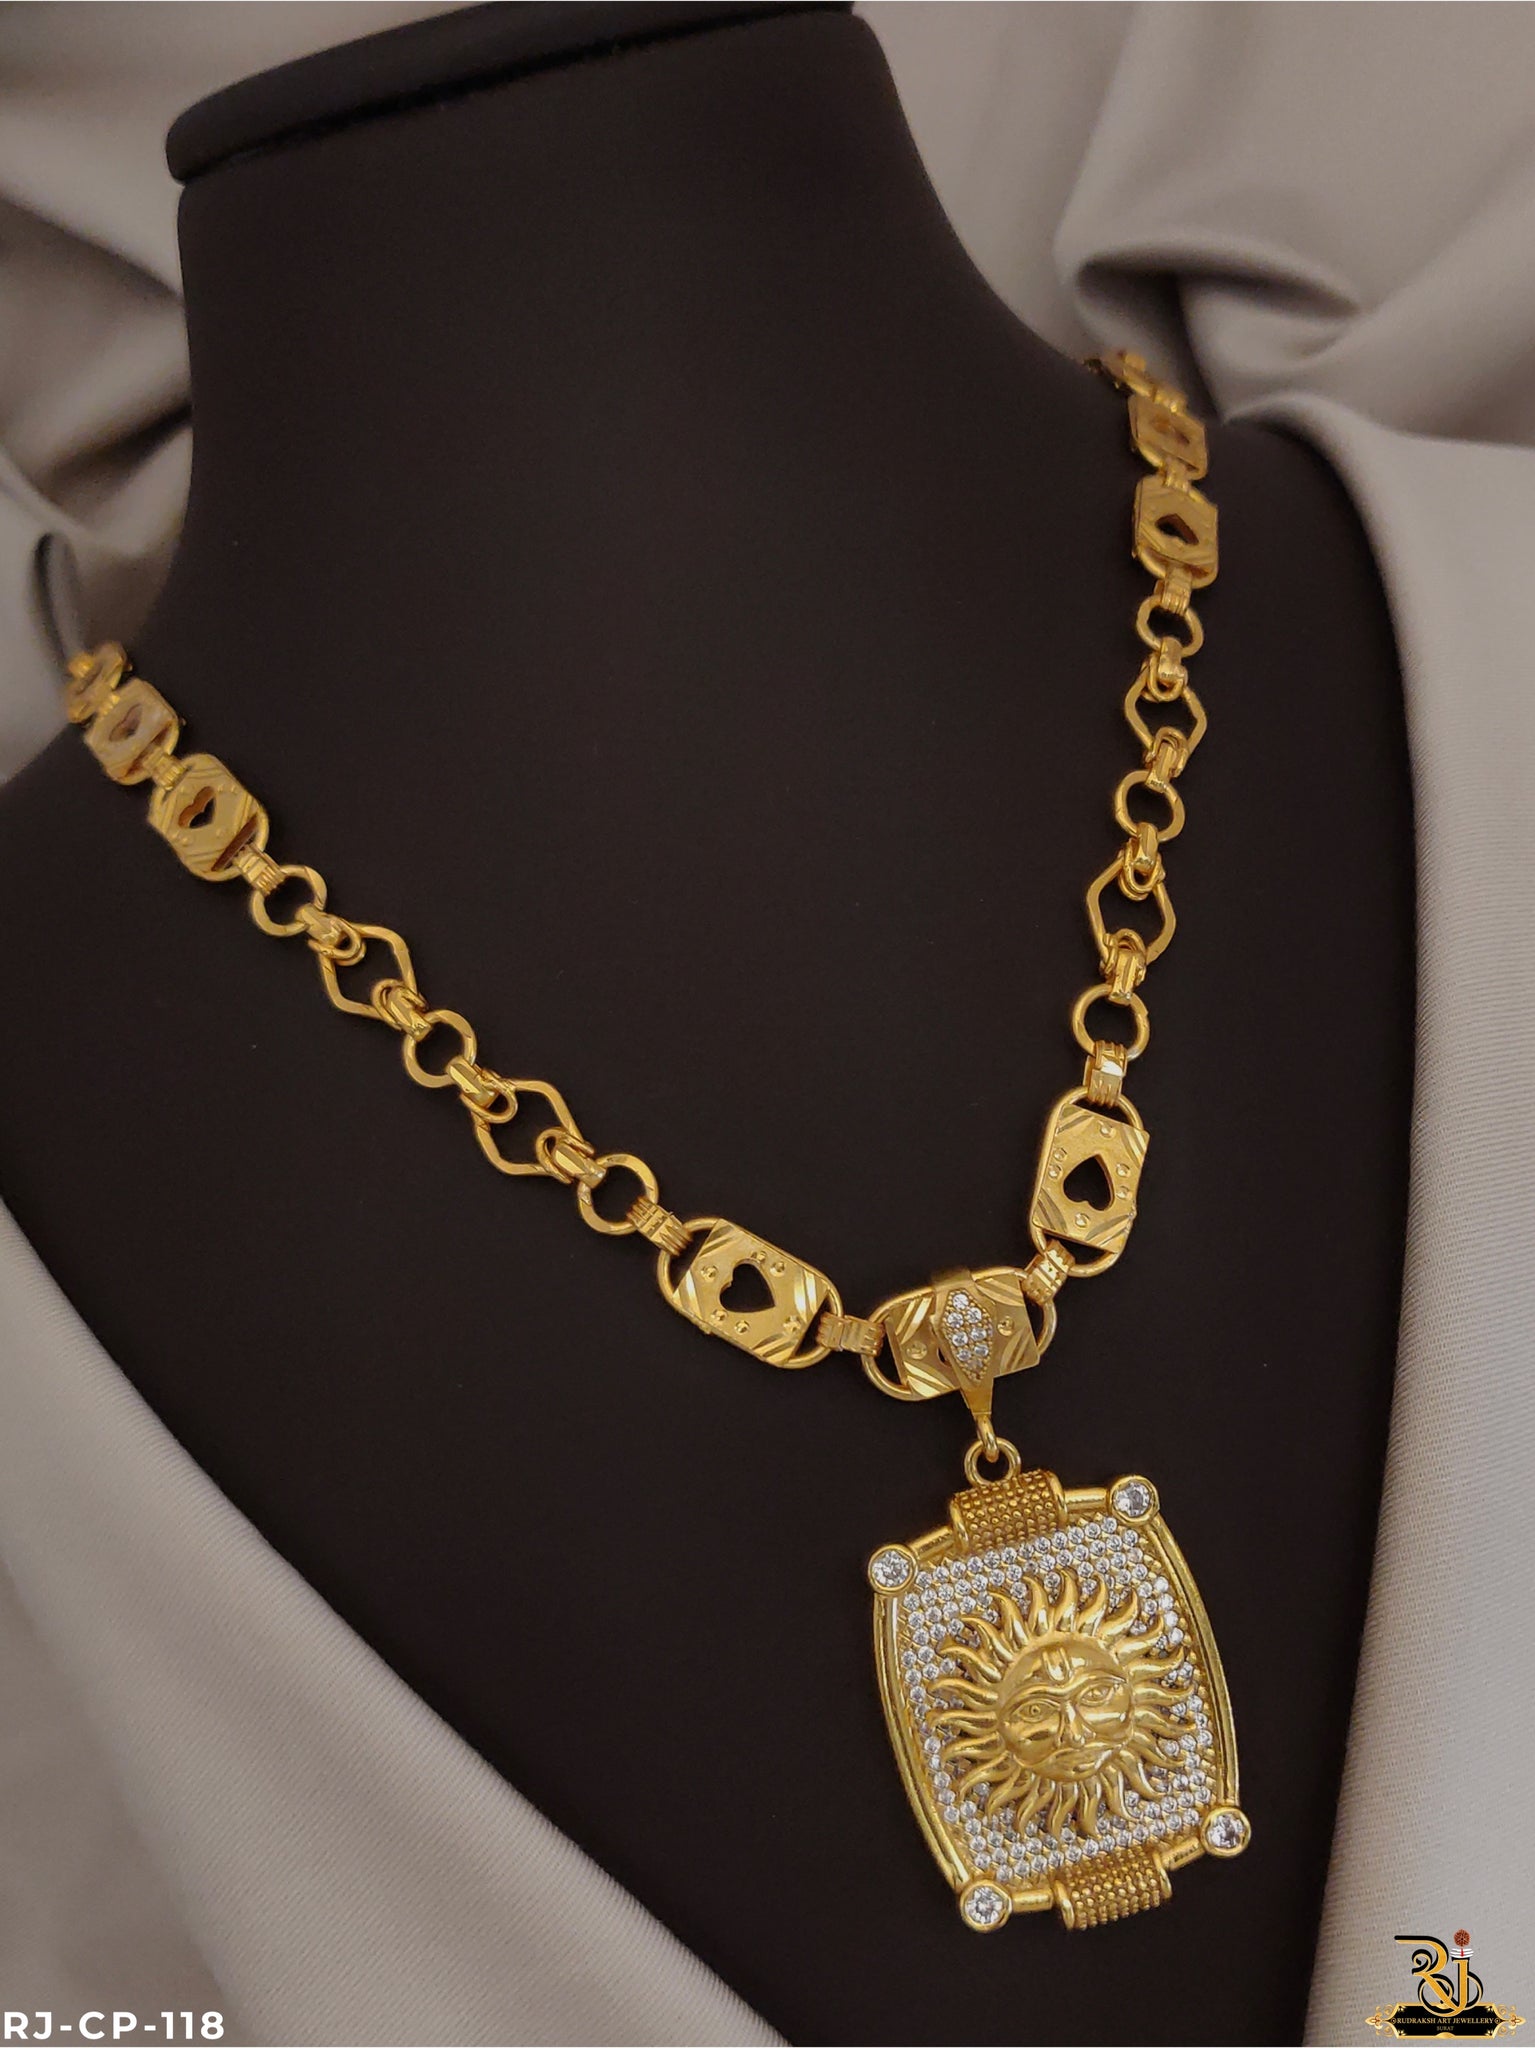 Sun Design Gold Pleted Pendant with Pan Design Chain CP-118